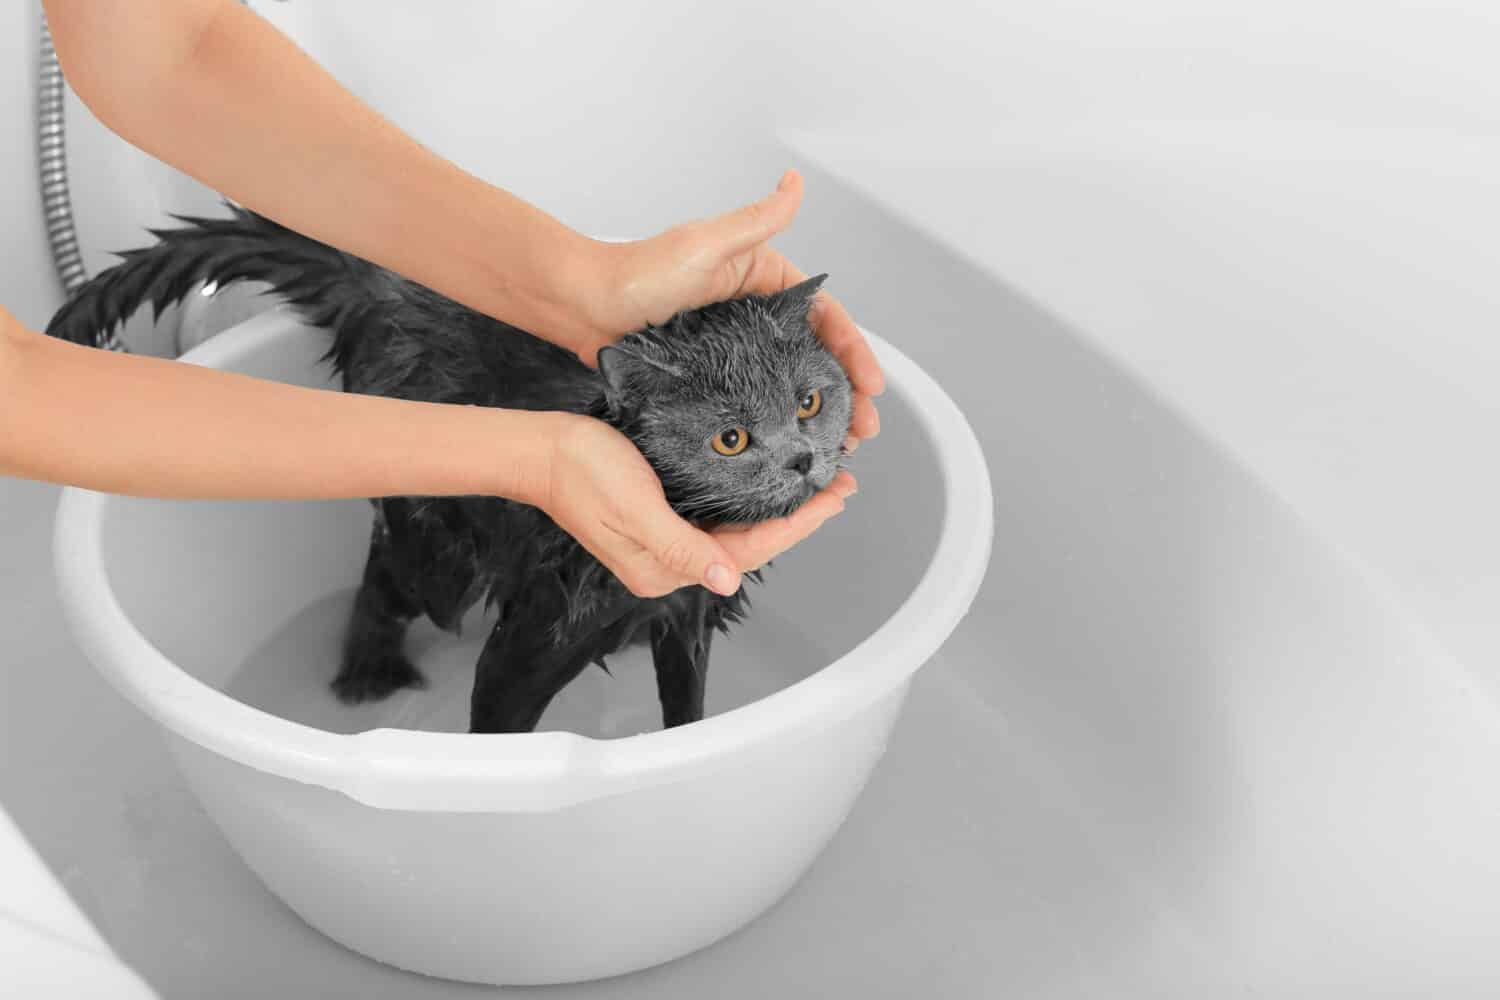 Gray cat in a white bathroom. Bathing process, pouring water, frightened wet cat, hygiene procedures. Good morning concept. Pet care. British cat on a white background.